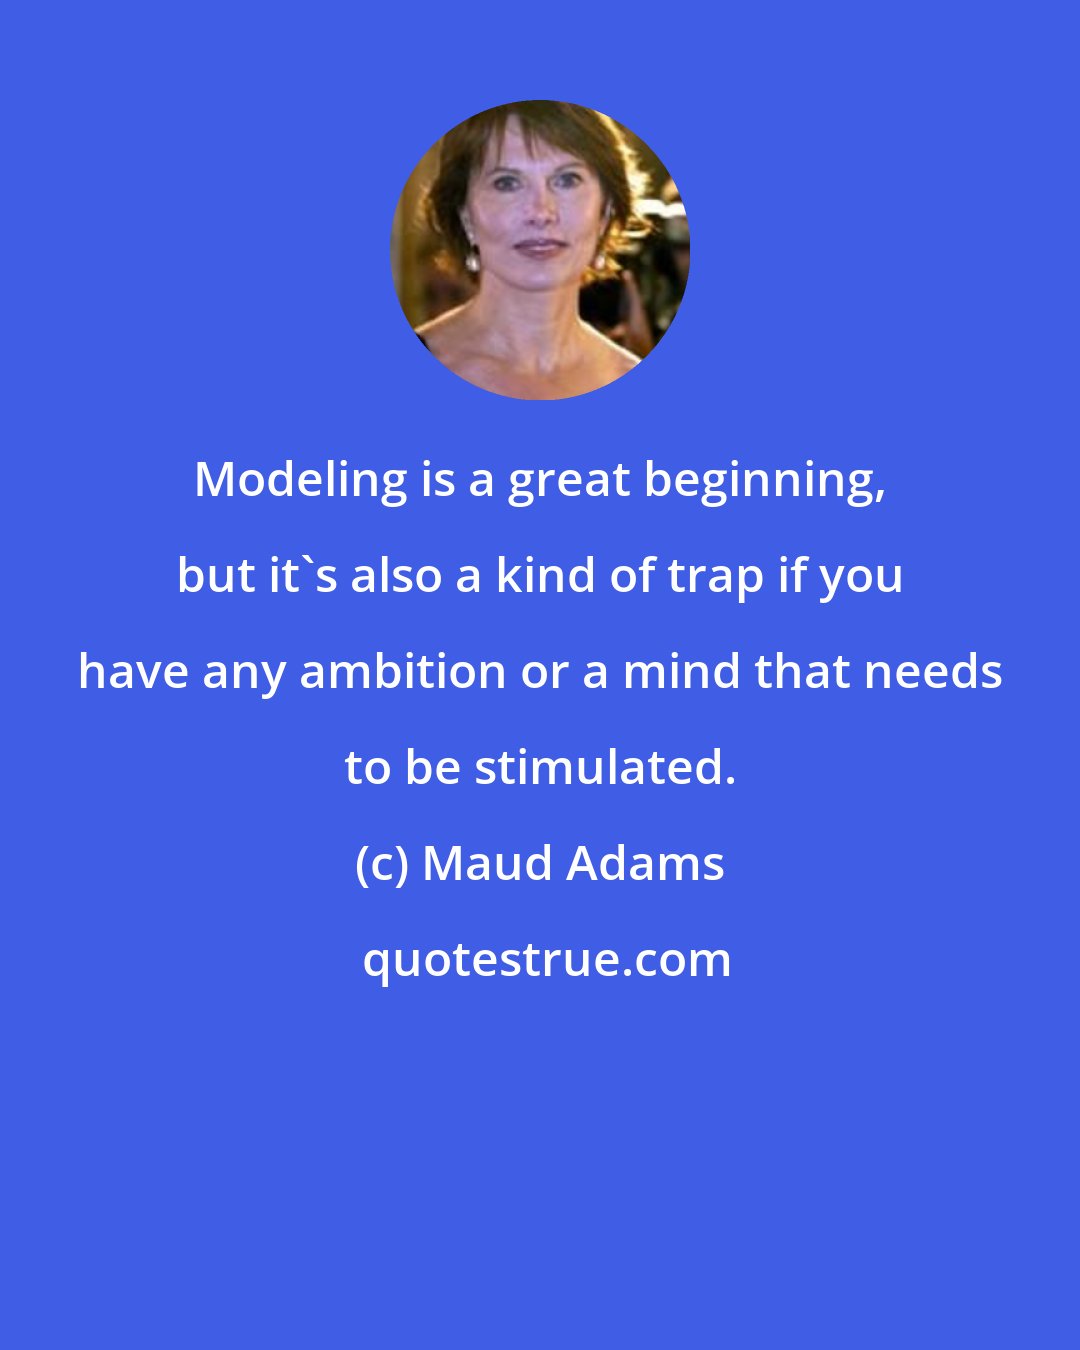 Maud Adams: Modeling is a great beginning, but it's also a kind of trap if you have any ambition or a mind that needs to be stimulated.